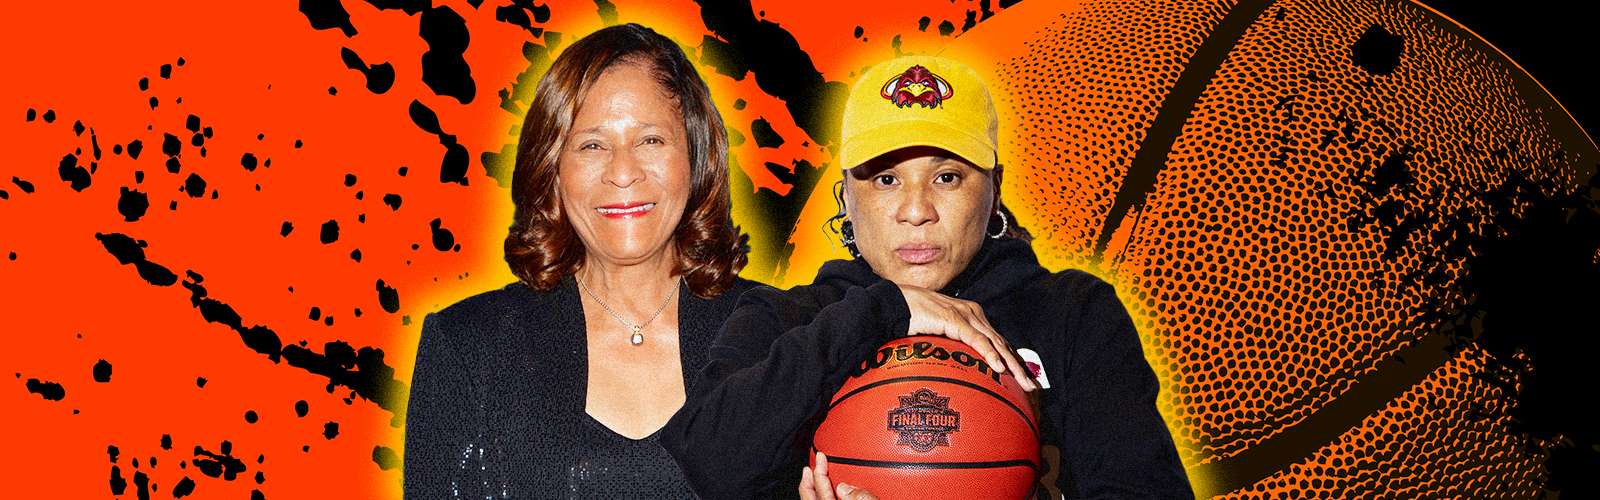 Dawn Staley, C. Vivian Stringer Fight For Financial Equity